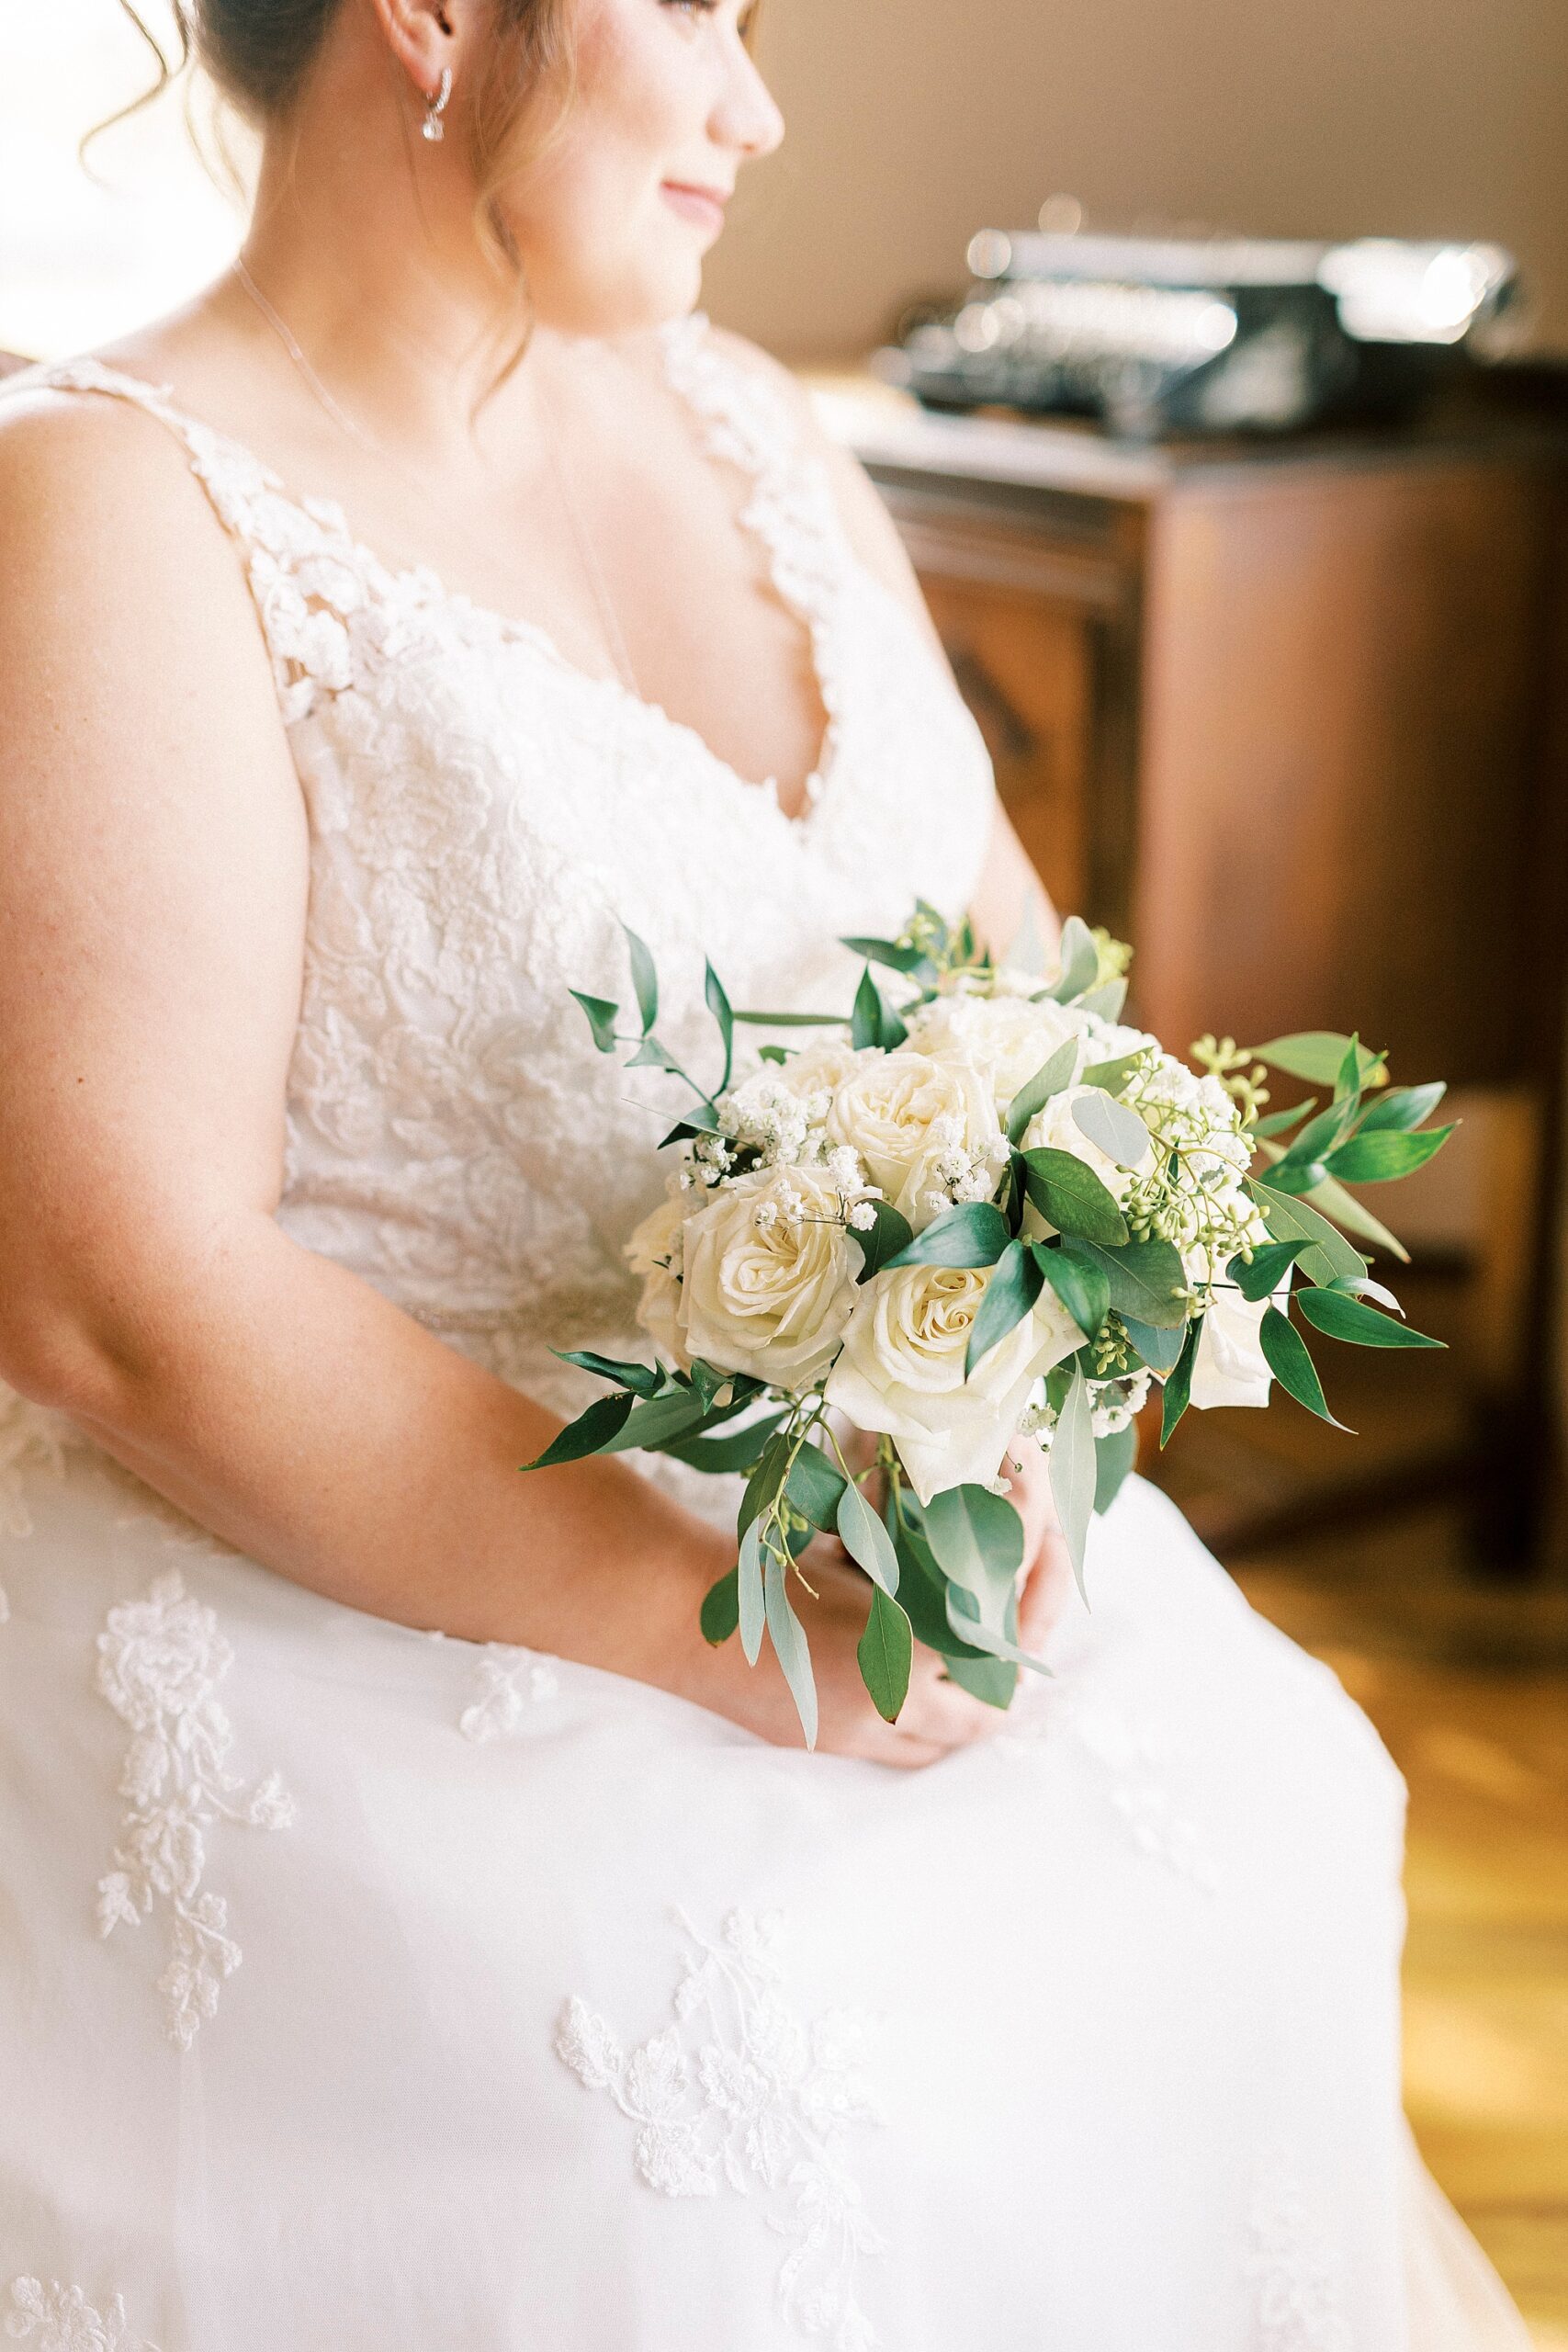 bride's bouquet of white flowers and greenery for fall wedding